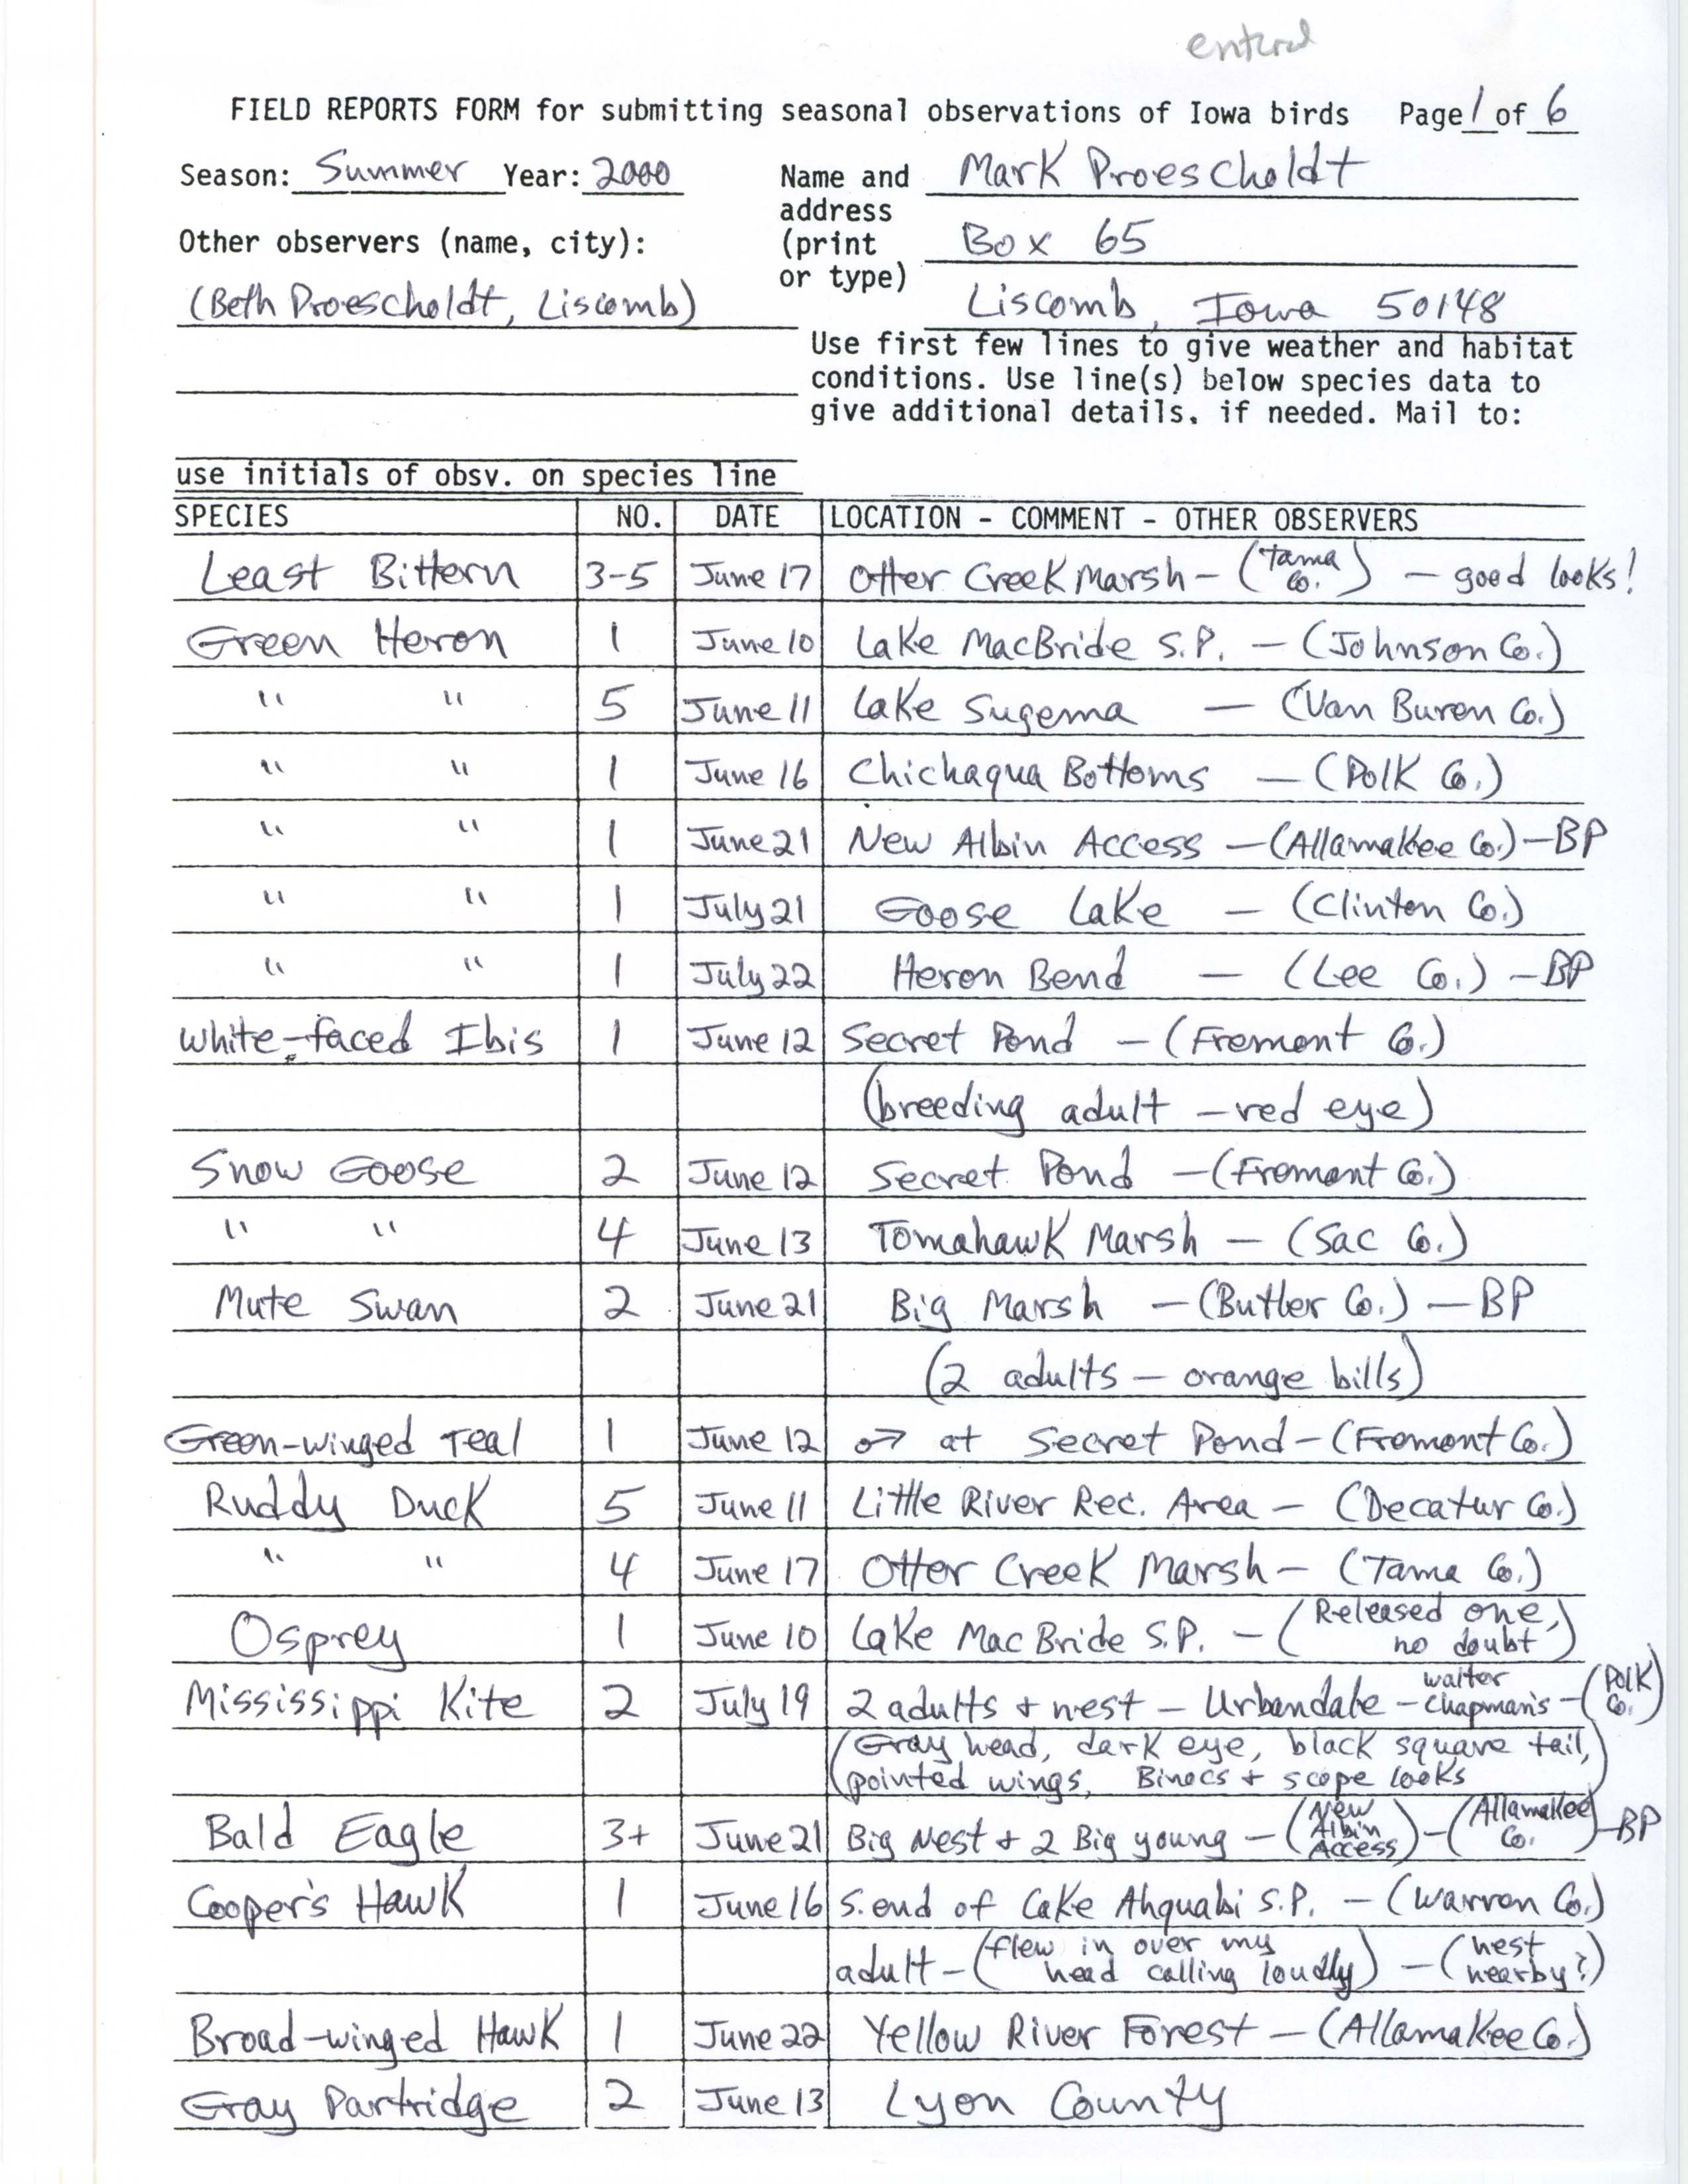 Field reports form for submitting seasonal observations of Iowa birds, Mark Proescholdt, summer 2000